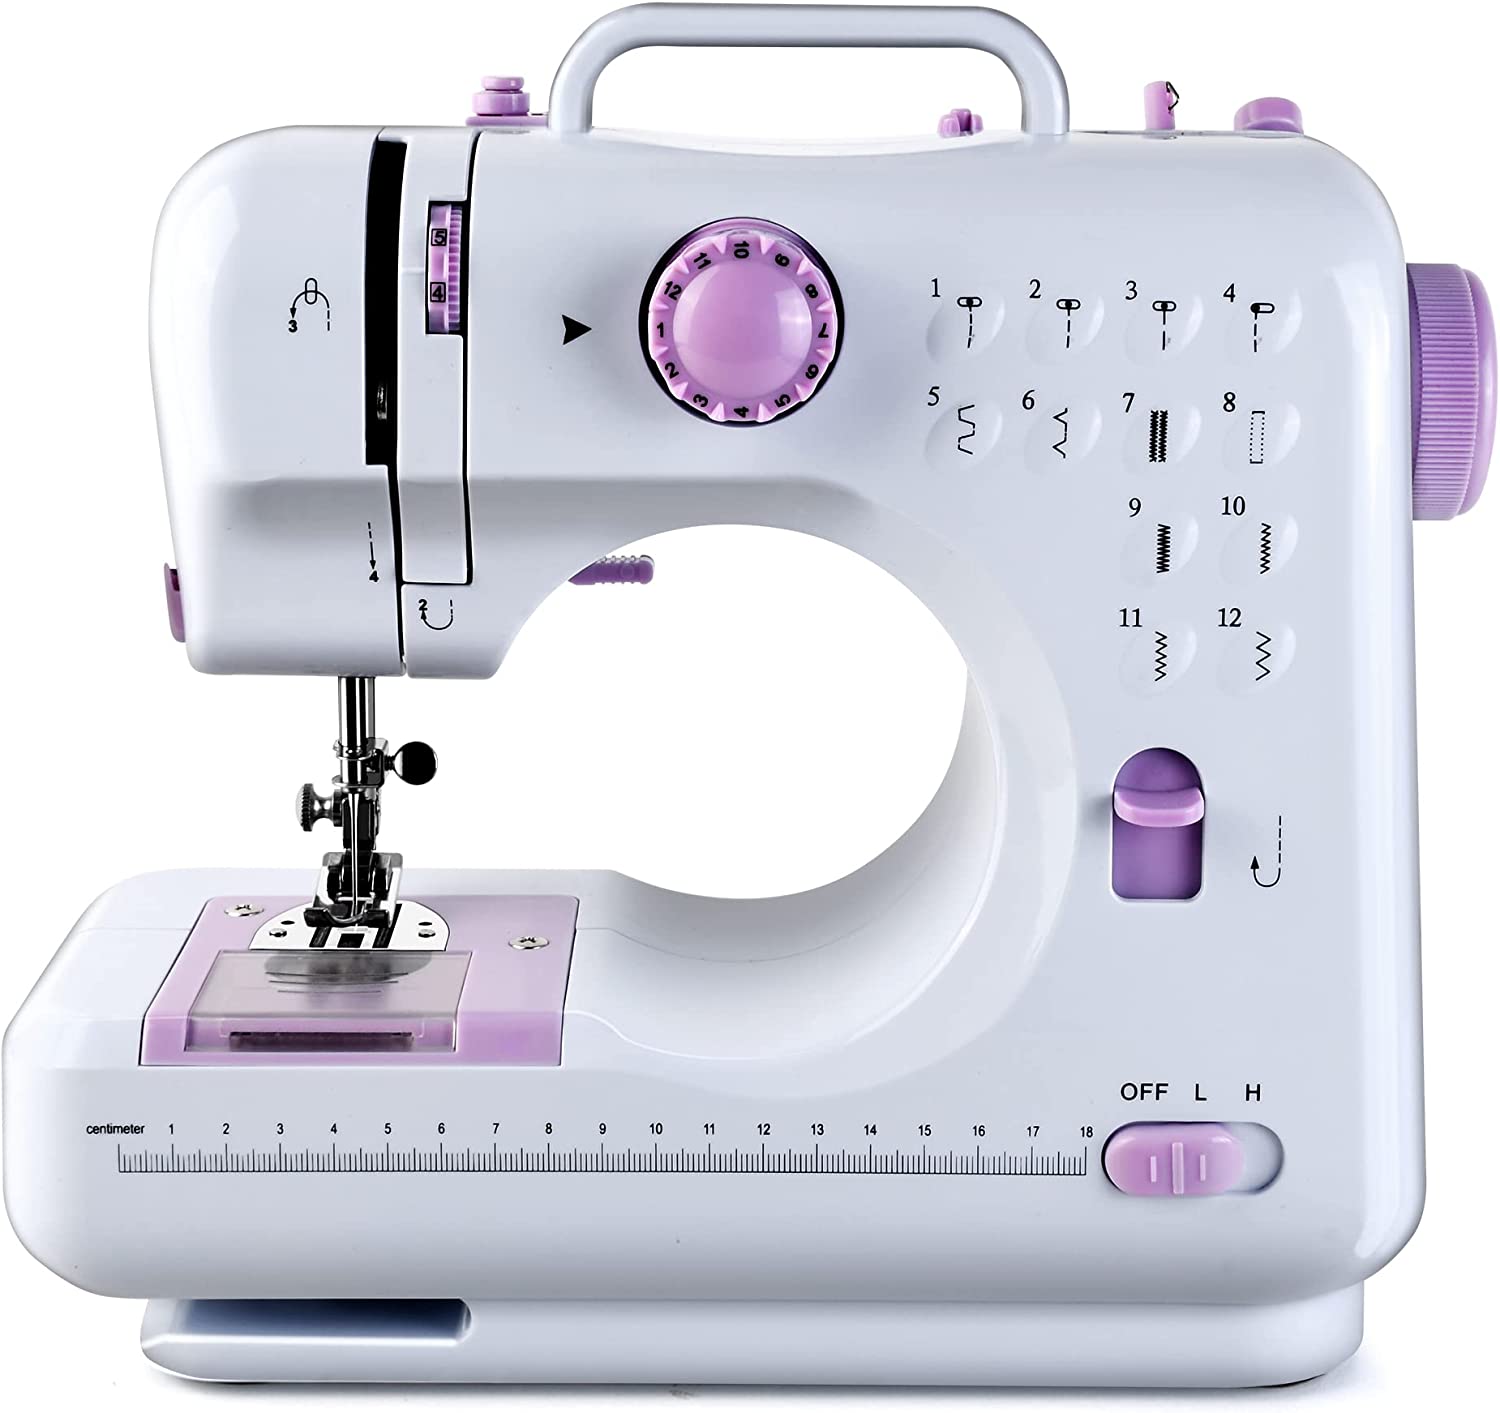 Viferr Household Hand-Held Tailor Electric Mini Sewing Machine Crafting Speed Mending Portable Machine with 12 Floral Stitches 2 Speed with Foot Pedal